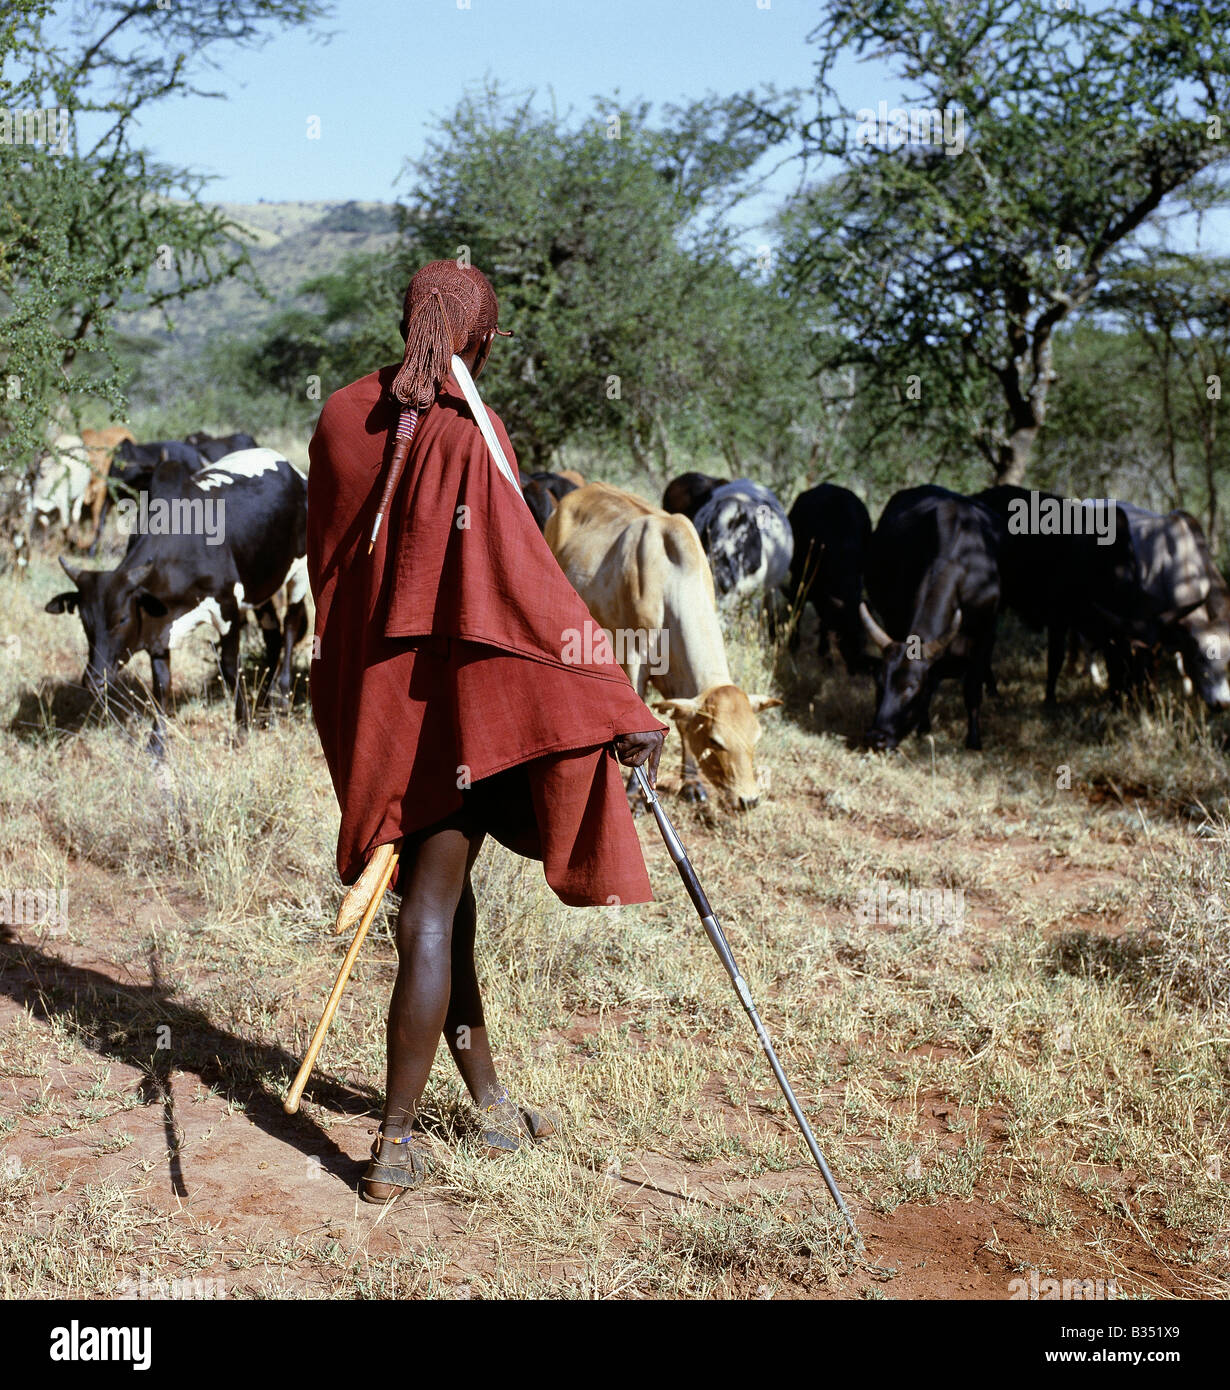 Kenya, Kajiado, Ilbisil. A Maasai warrior resplendent with his long ochred braids tied in a pigtail watches over his family's cattle, spear in hand. The singular hairstyle of warriors sets them apart from other members of their society. Stock Photo